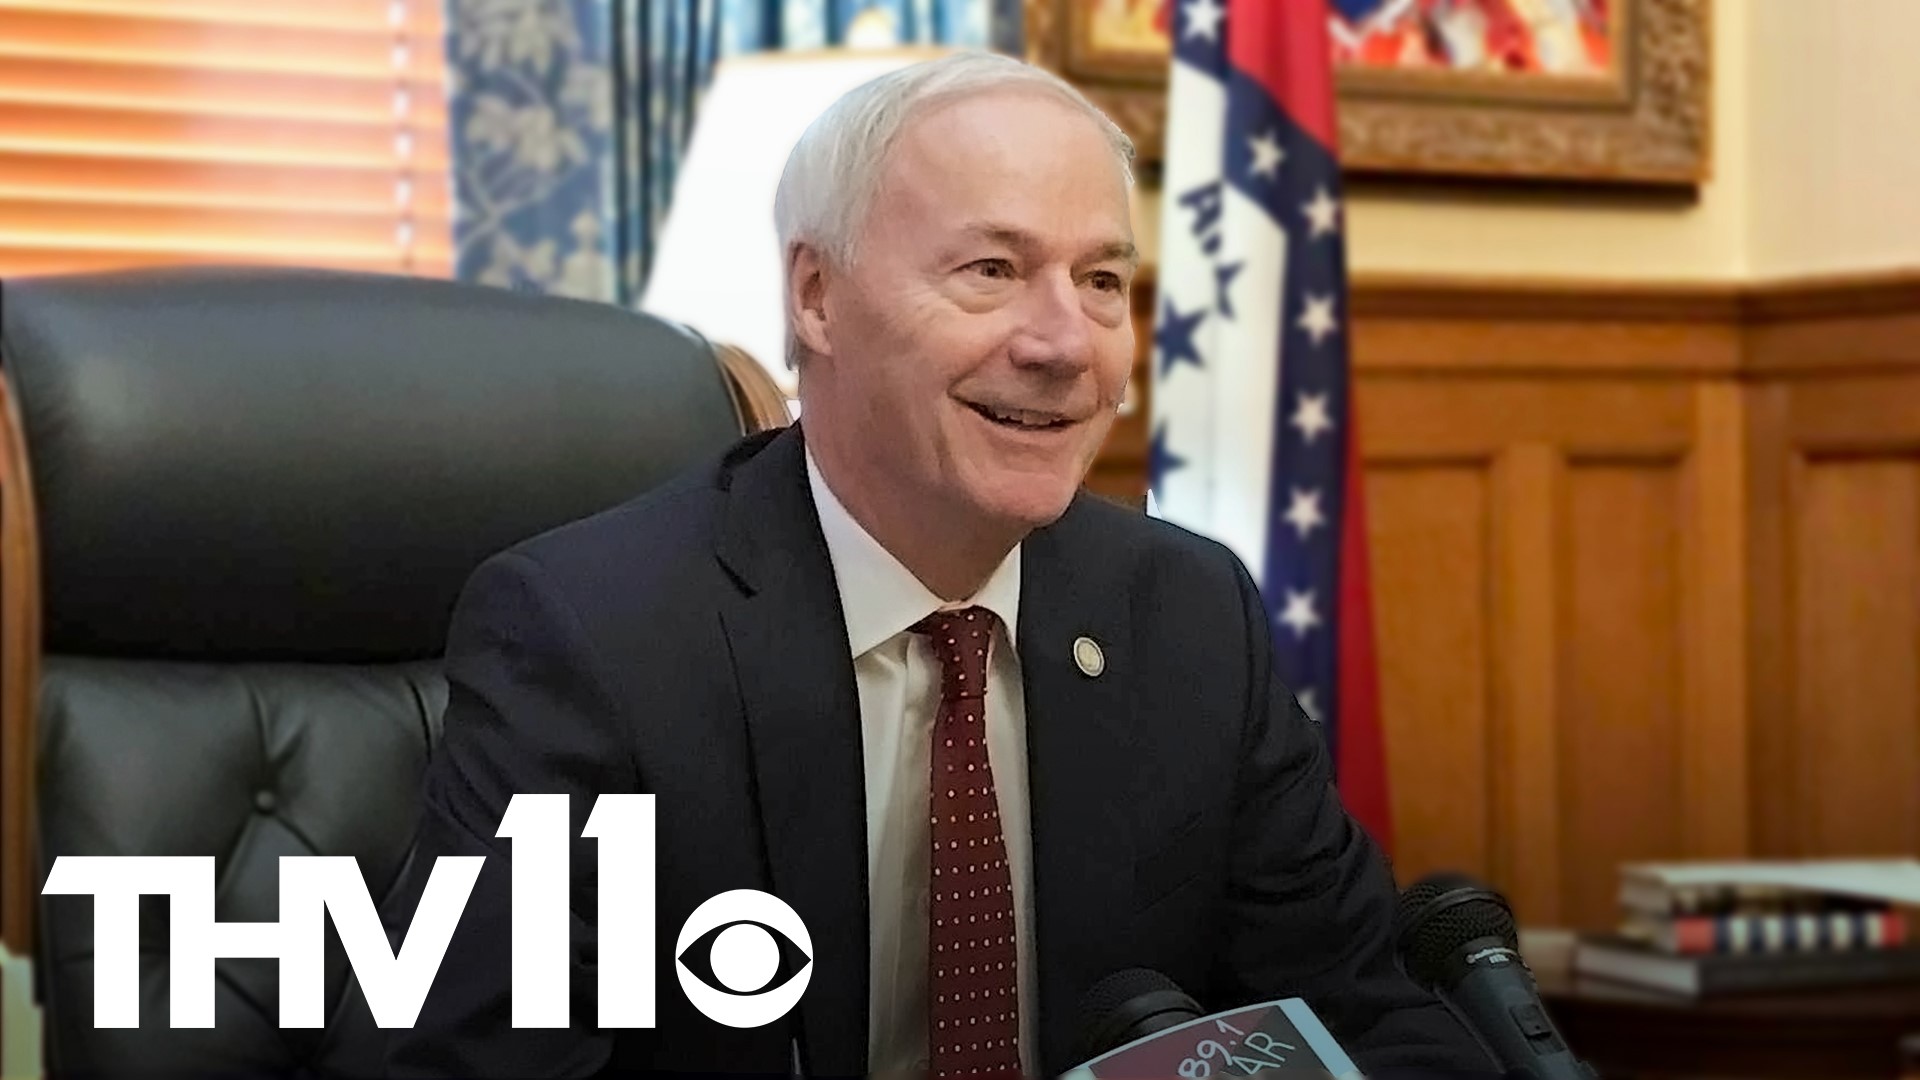 Over the past several months, Governor Hutchinson has been working to address the rising crime in Little Rock.